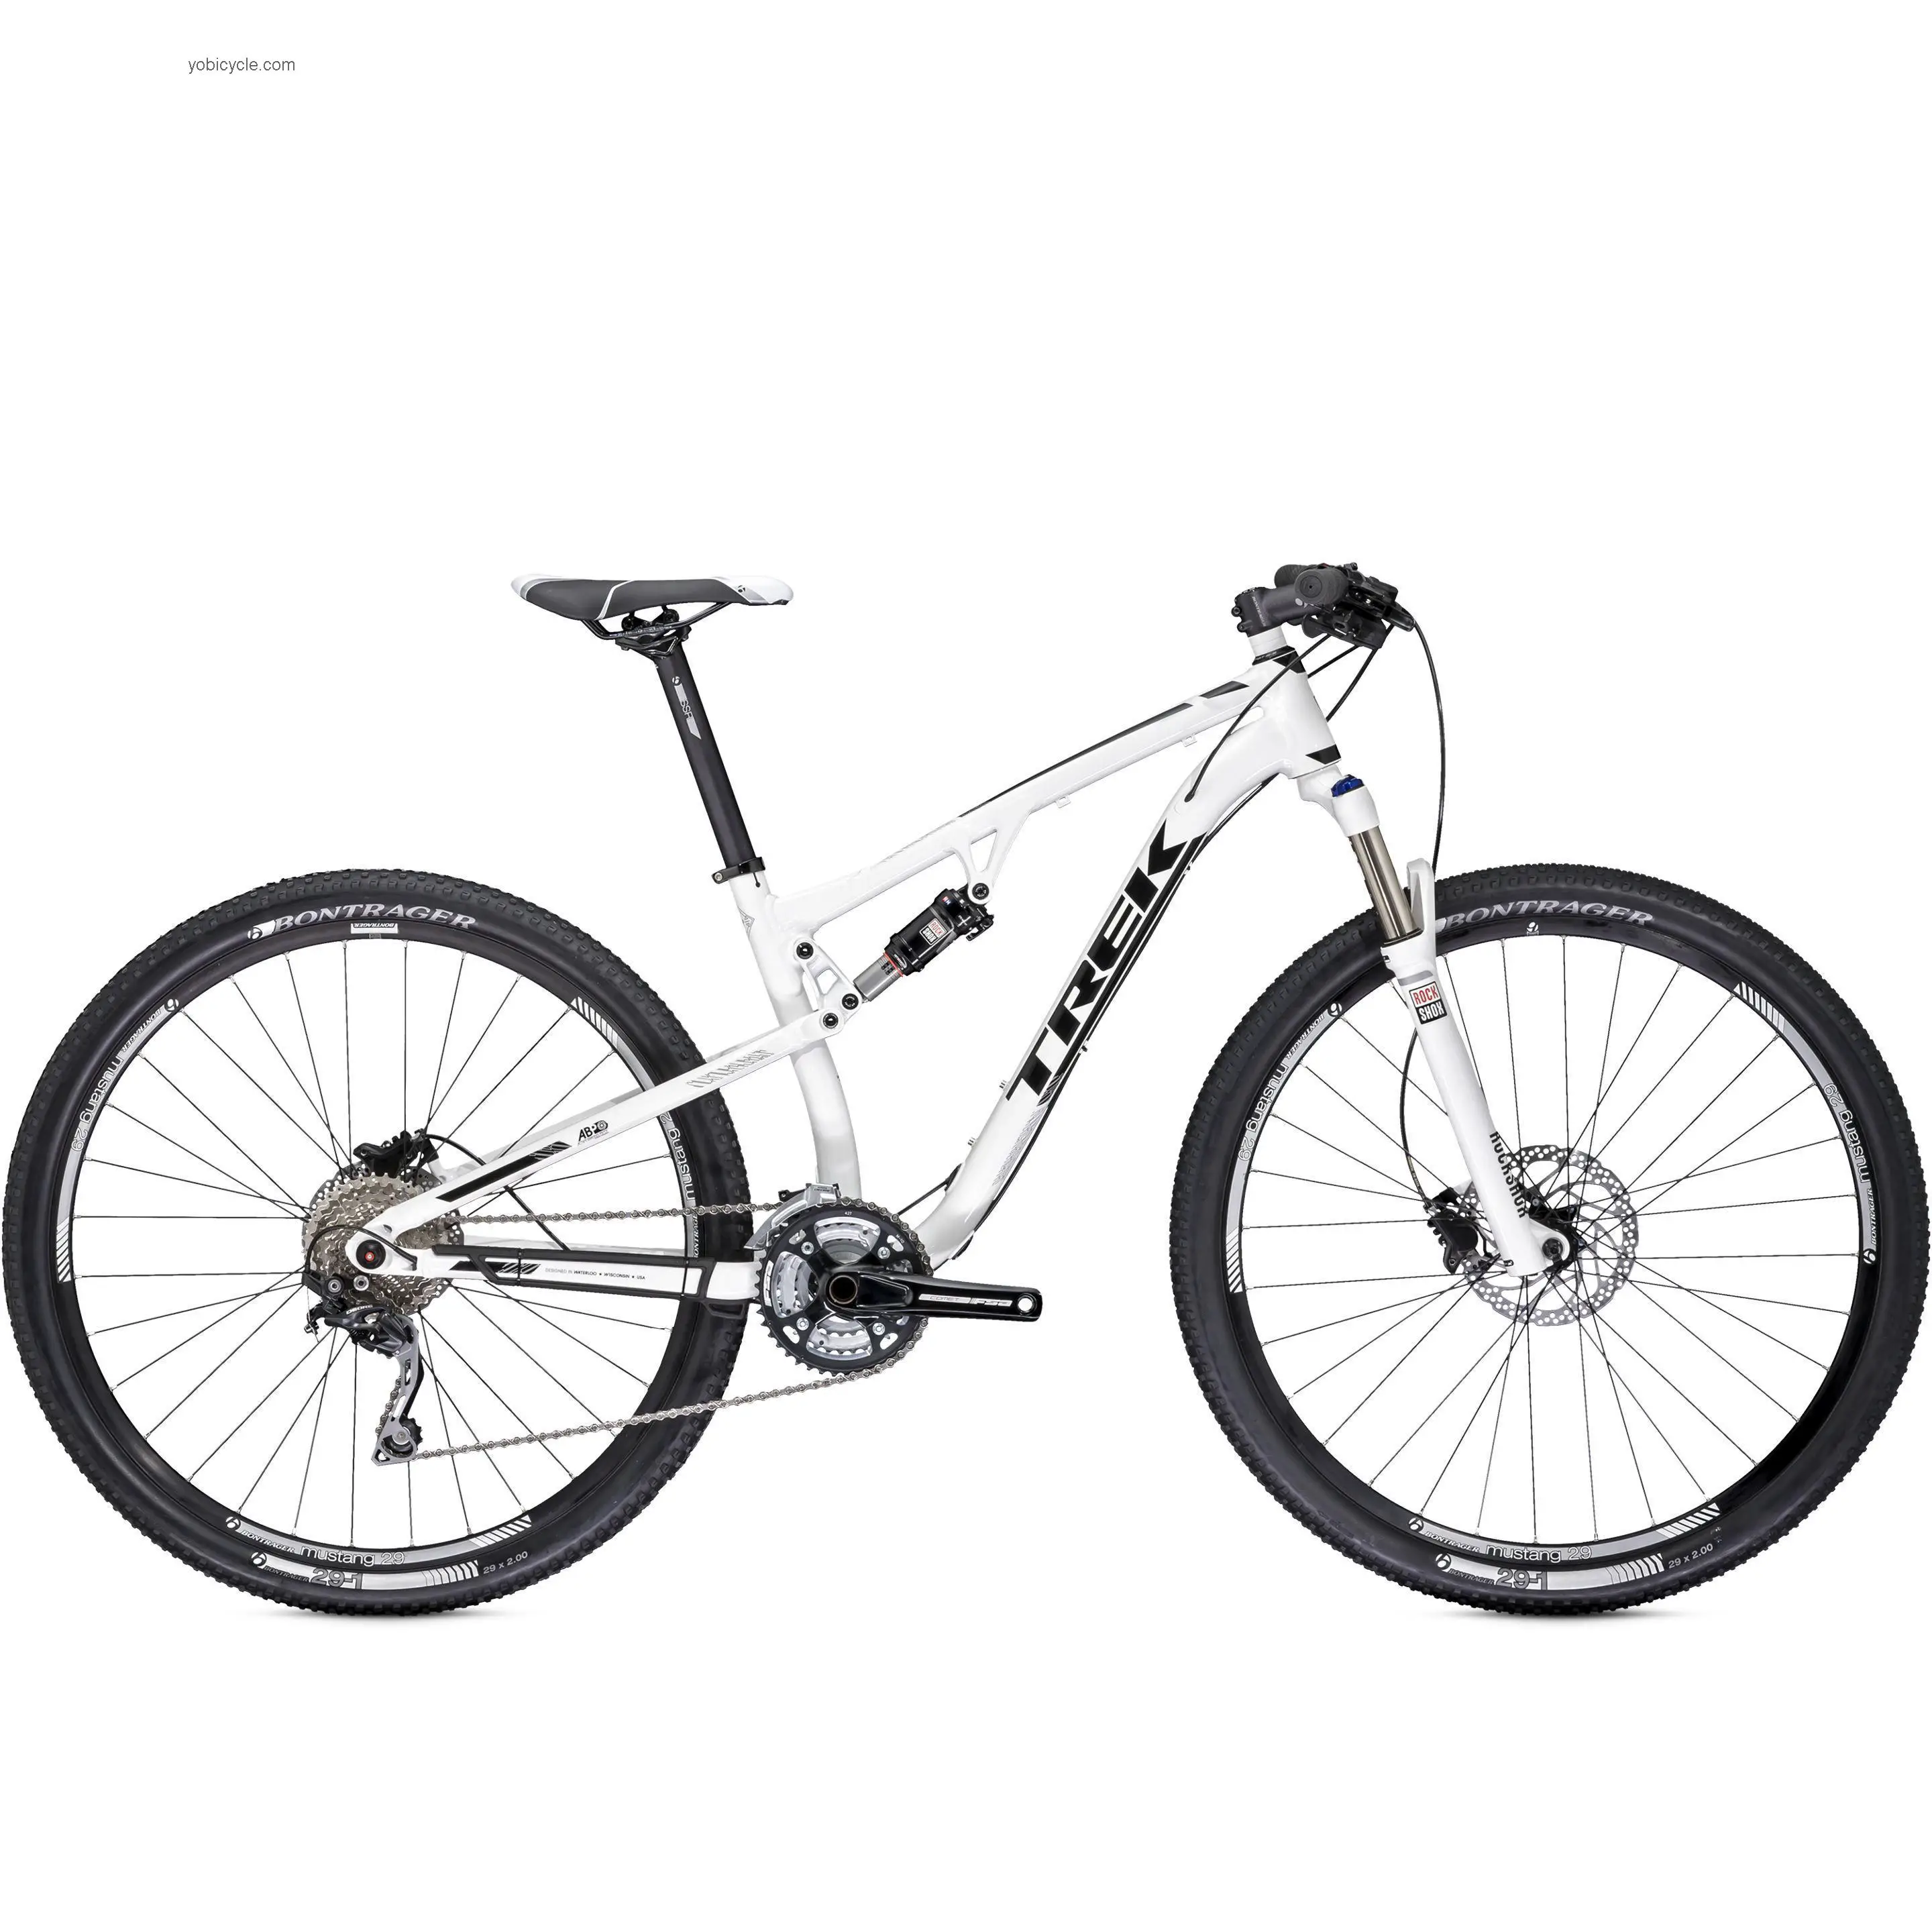 Trek Superfly FS 6 2014 comparison online with competitors